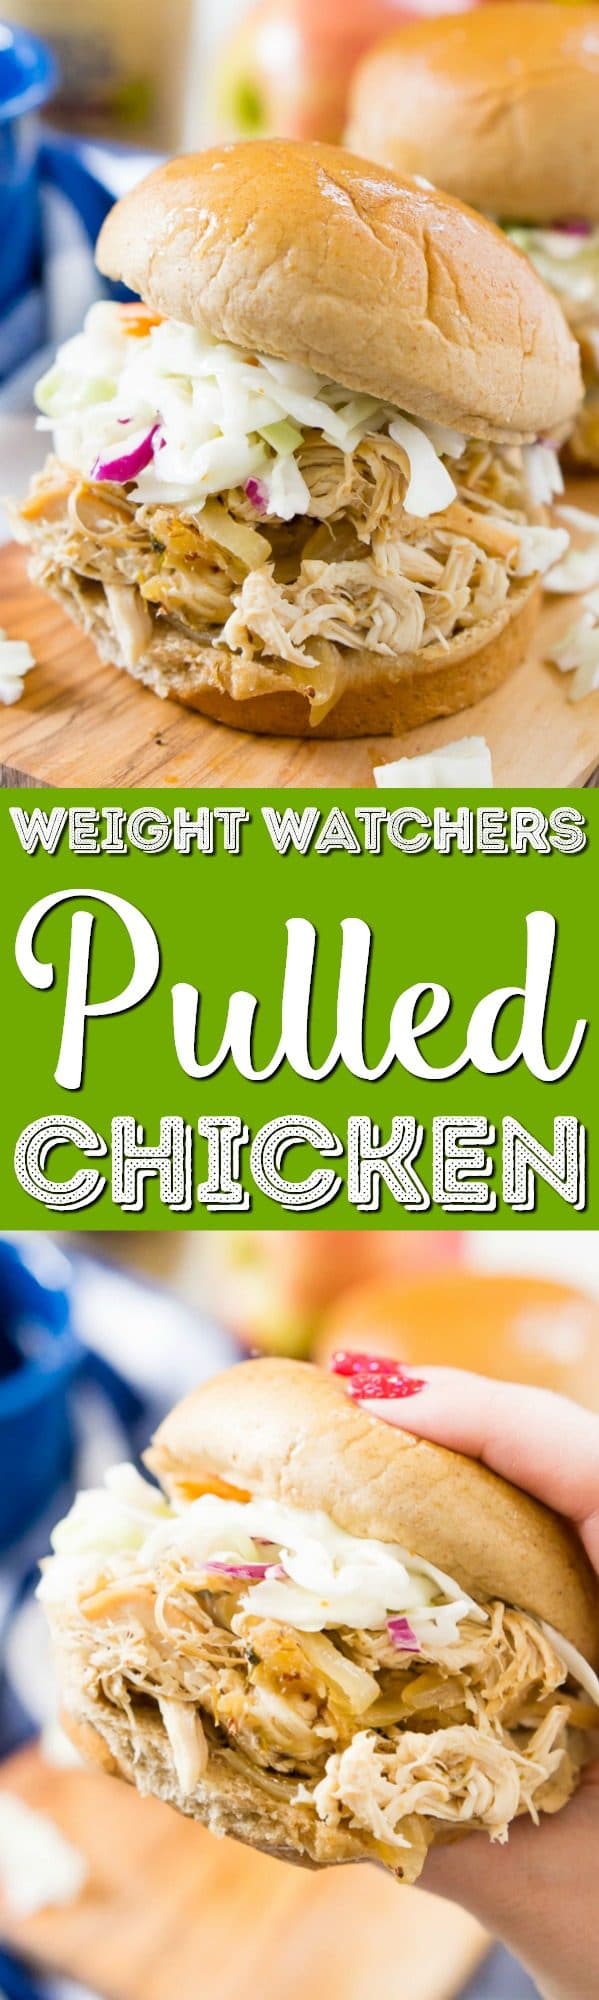 This Apple Cider Pulled Chicken is Weight Watchers approved and so easy to make! You can turn it into sandwiches, tacos, sliders, or serve it over rice!